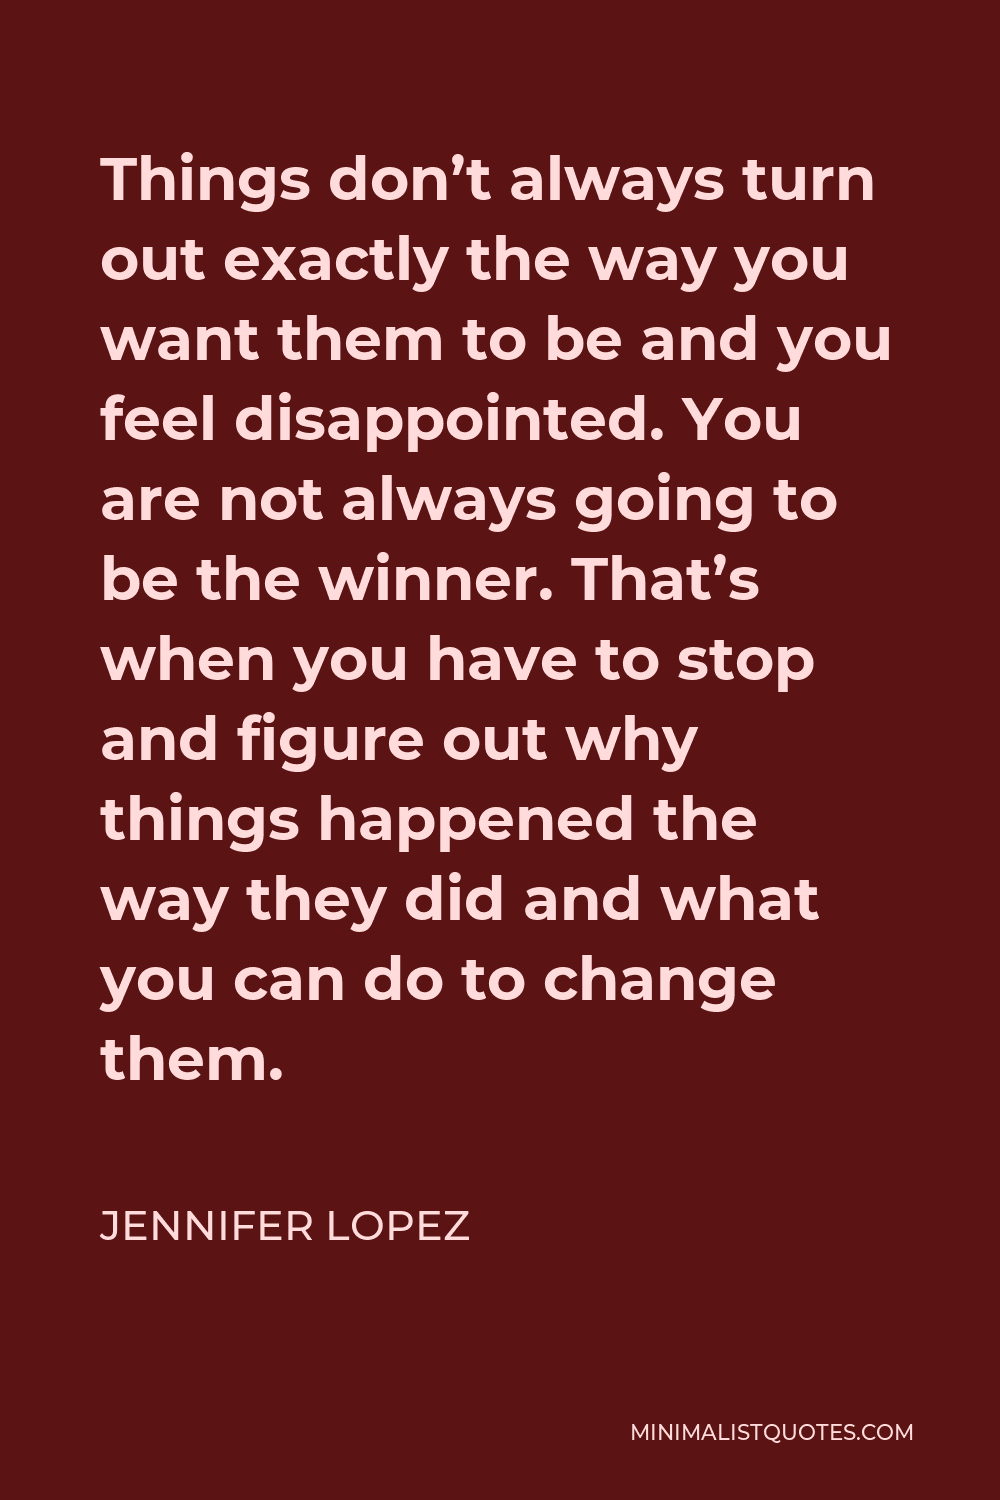 Jennifer Lopez Quote - Things don’t always turn out exactly the way you want them to be and you feel disappointed. You are not always going to be the winner. That’s when you have to stop and figure out why things happened the way they did and what you can do to change them.